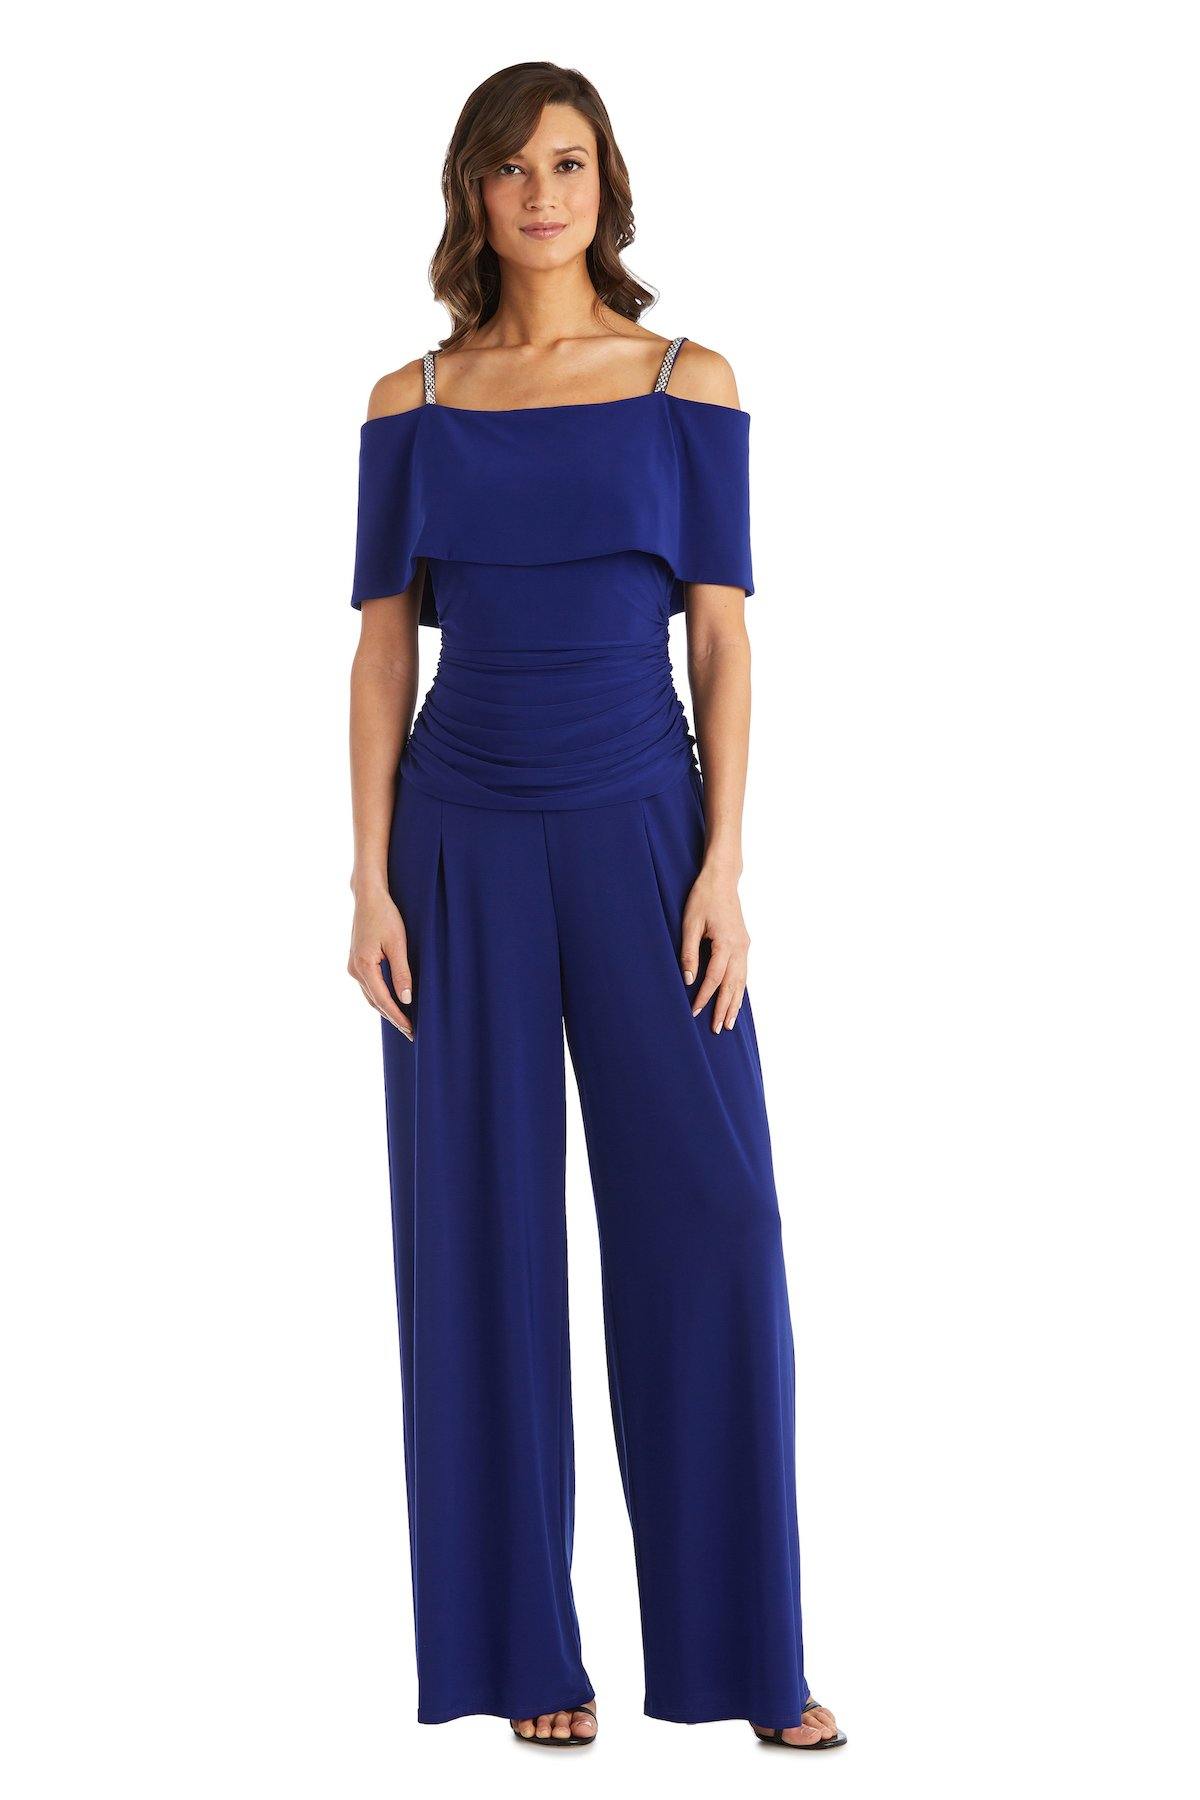 Electric Blue R&M Richards 5982 One Piece Jumpsuit for $69.99 – The ...